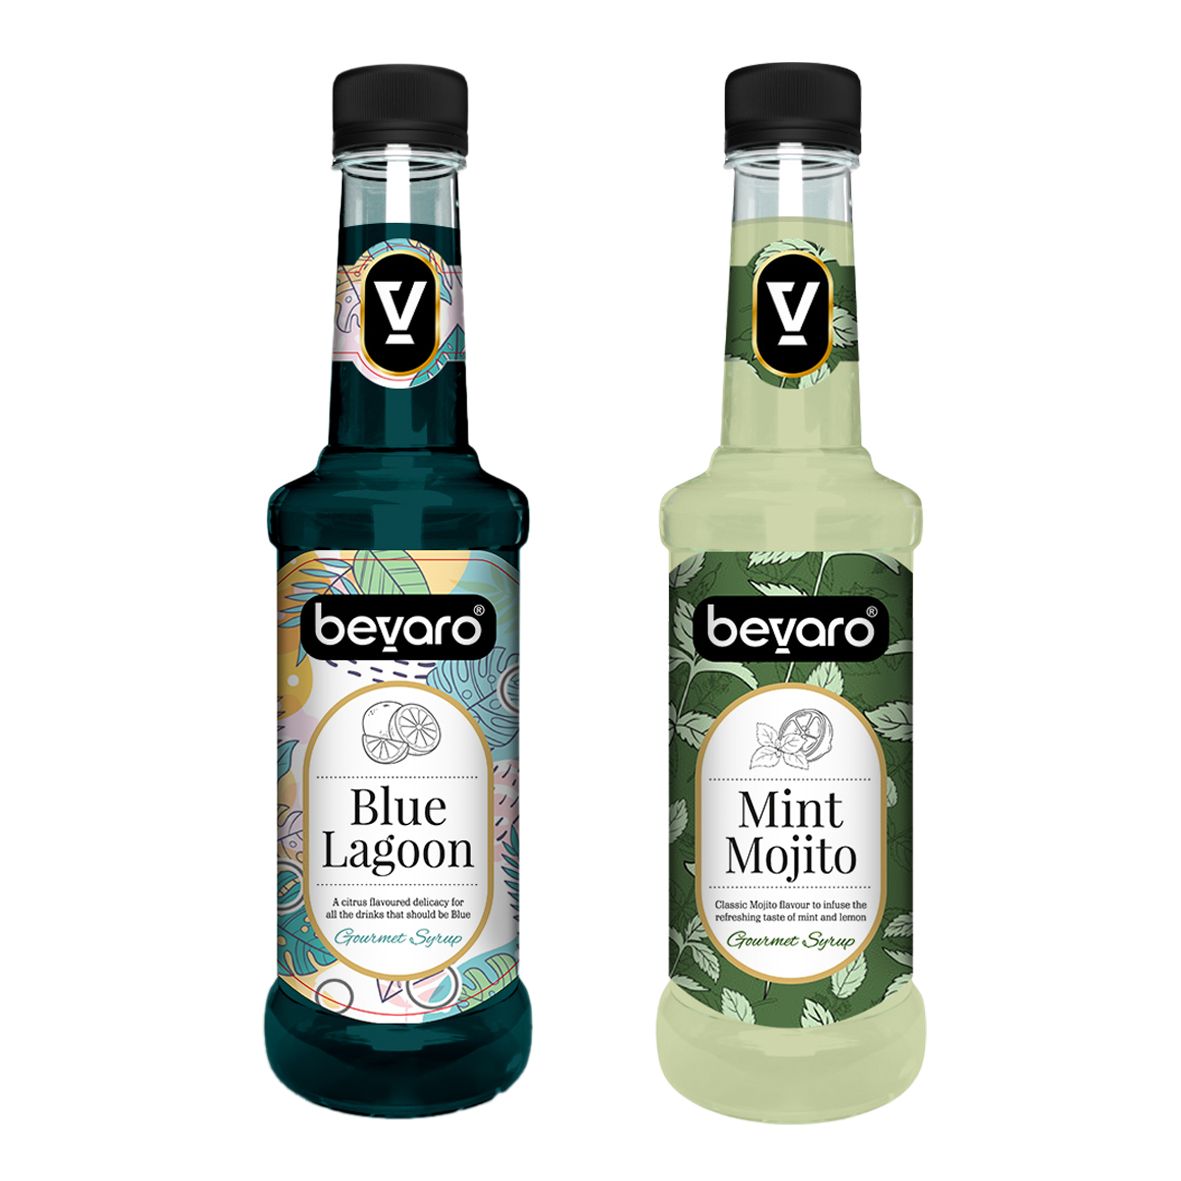 BEVARO Mint Mojito Syrup and Blue Lagoon Syrup Combo, 300ml each Blue Lagoon + Mint Mojito  (600 ml, Pack of 2)